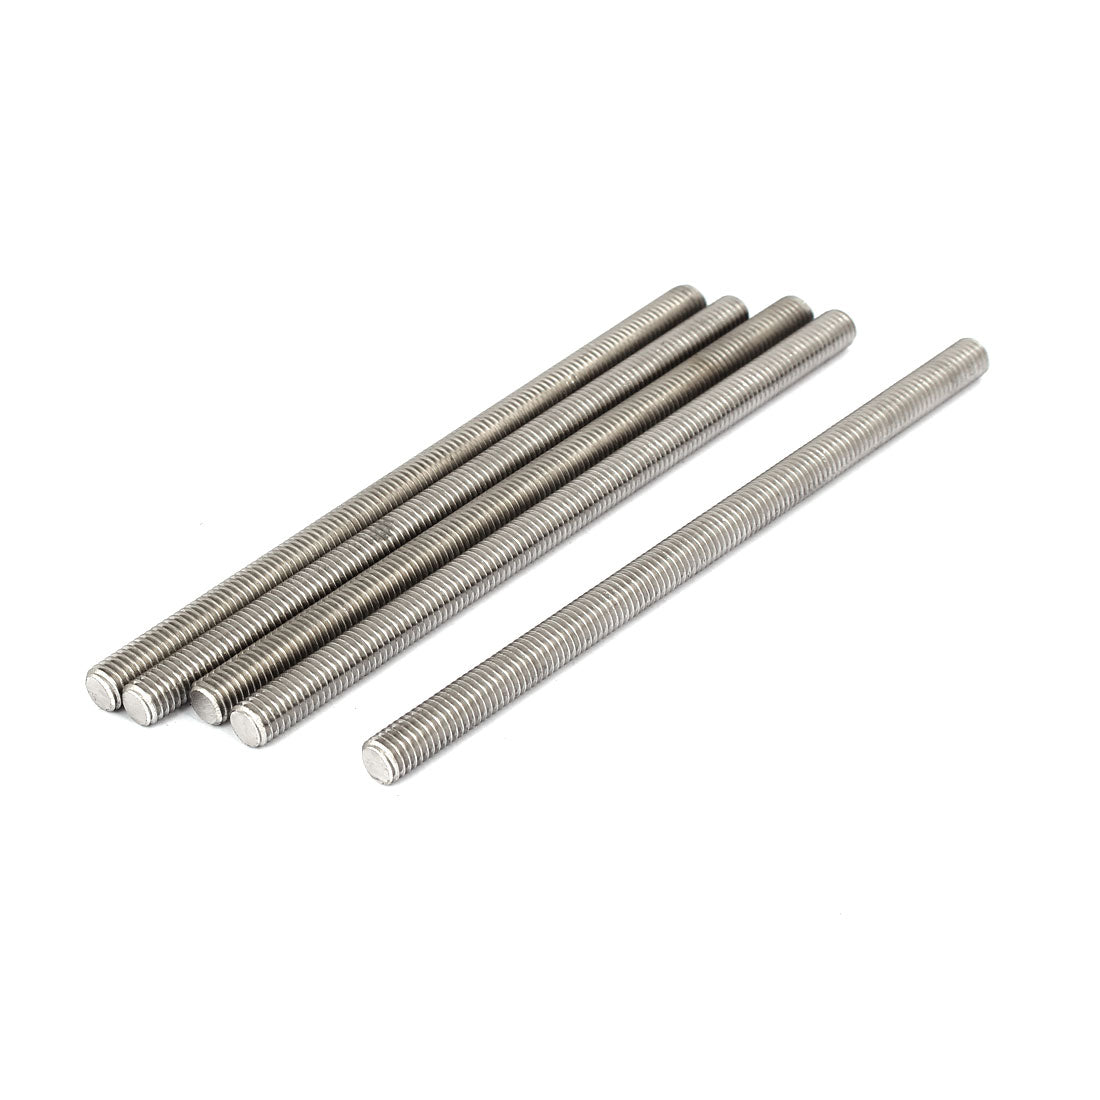 uxcell Uxcell M8 x 150mm 1.25mm Pitch 304 Stainless Steel Fully Threaded Rods Fasteners 5 Pcs